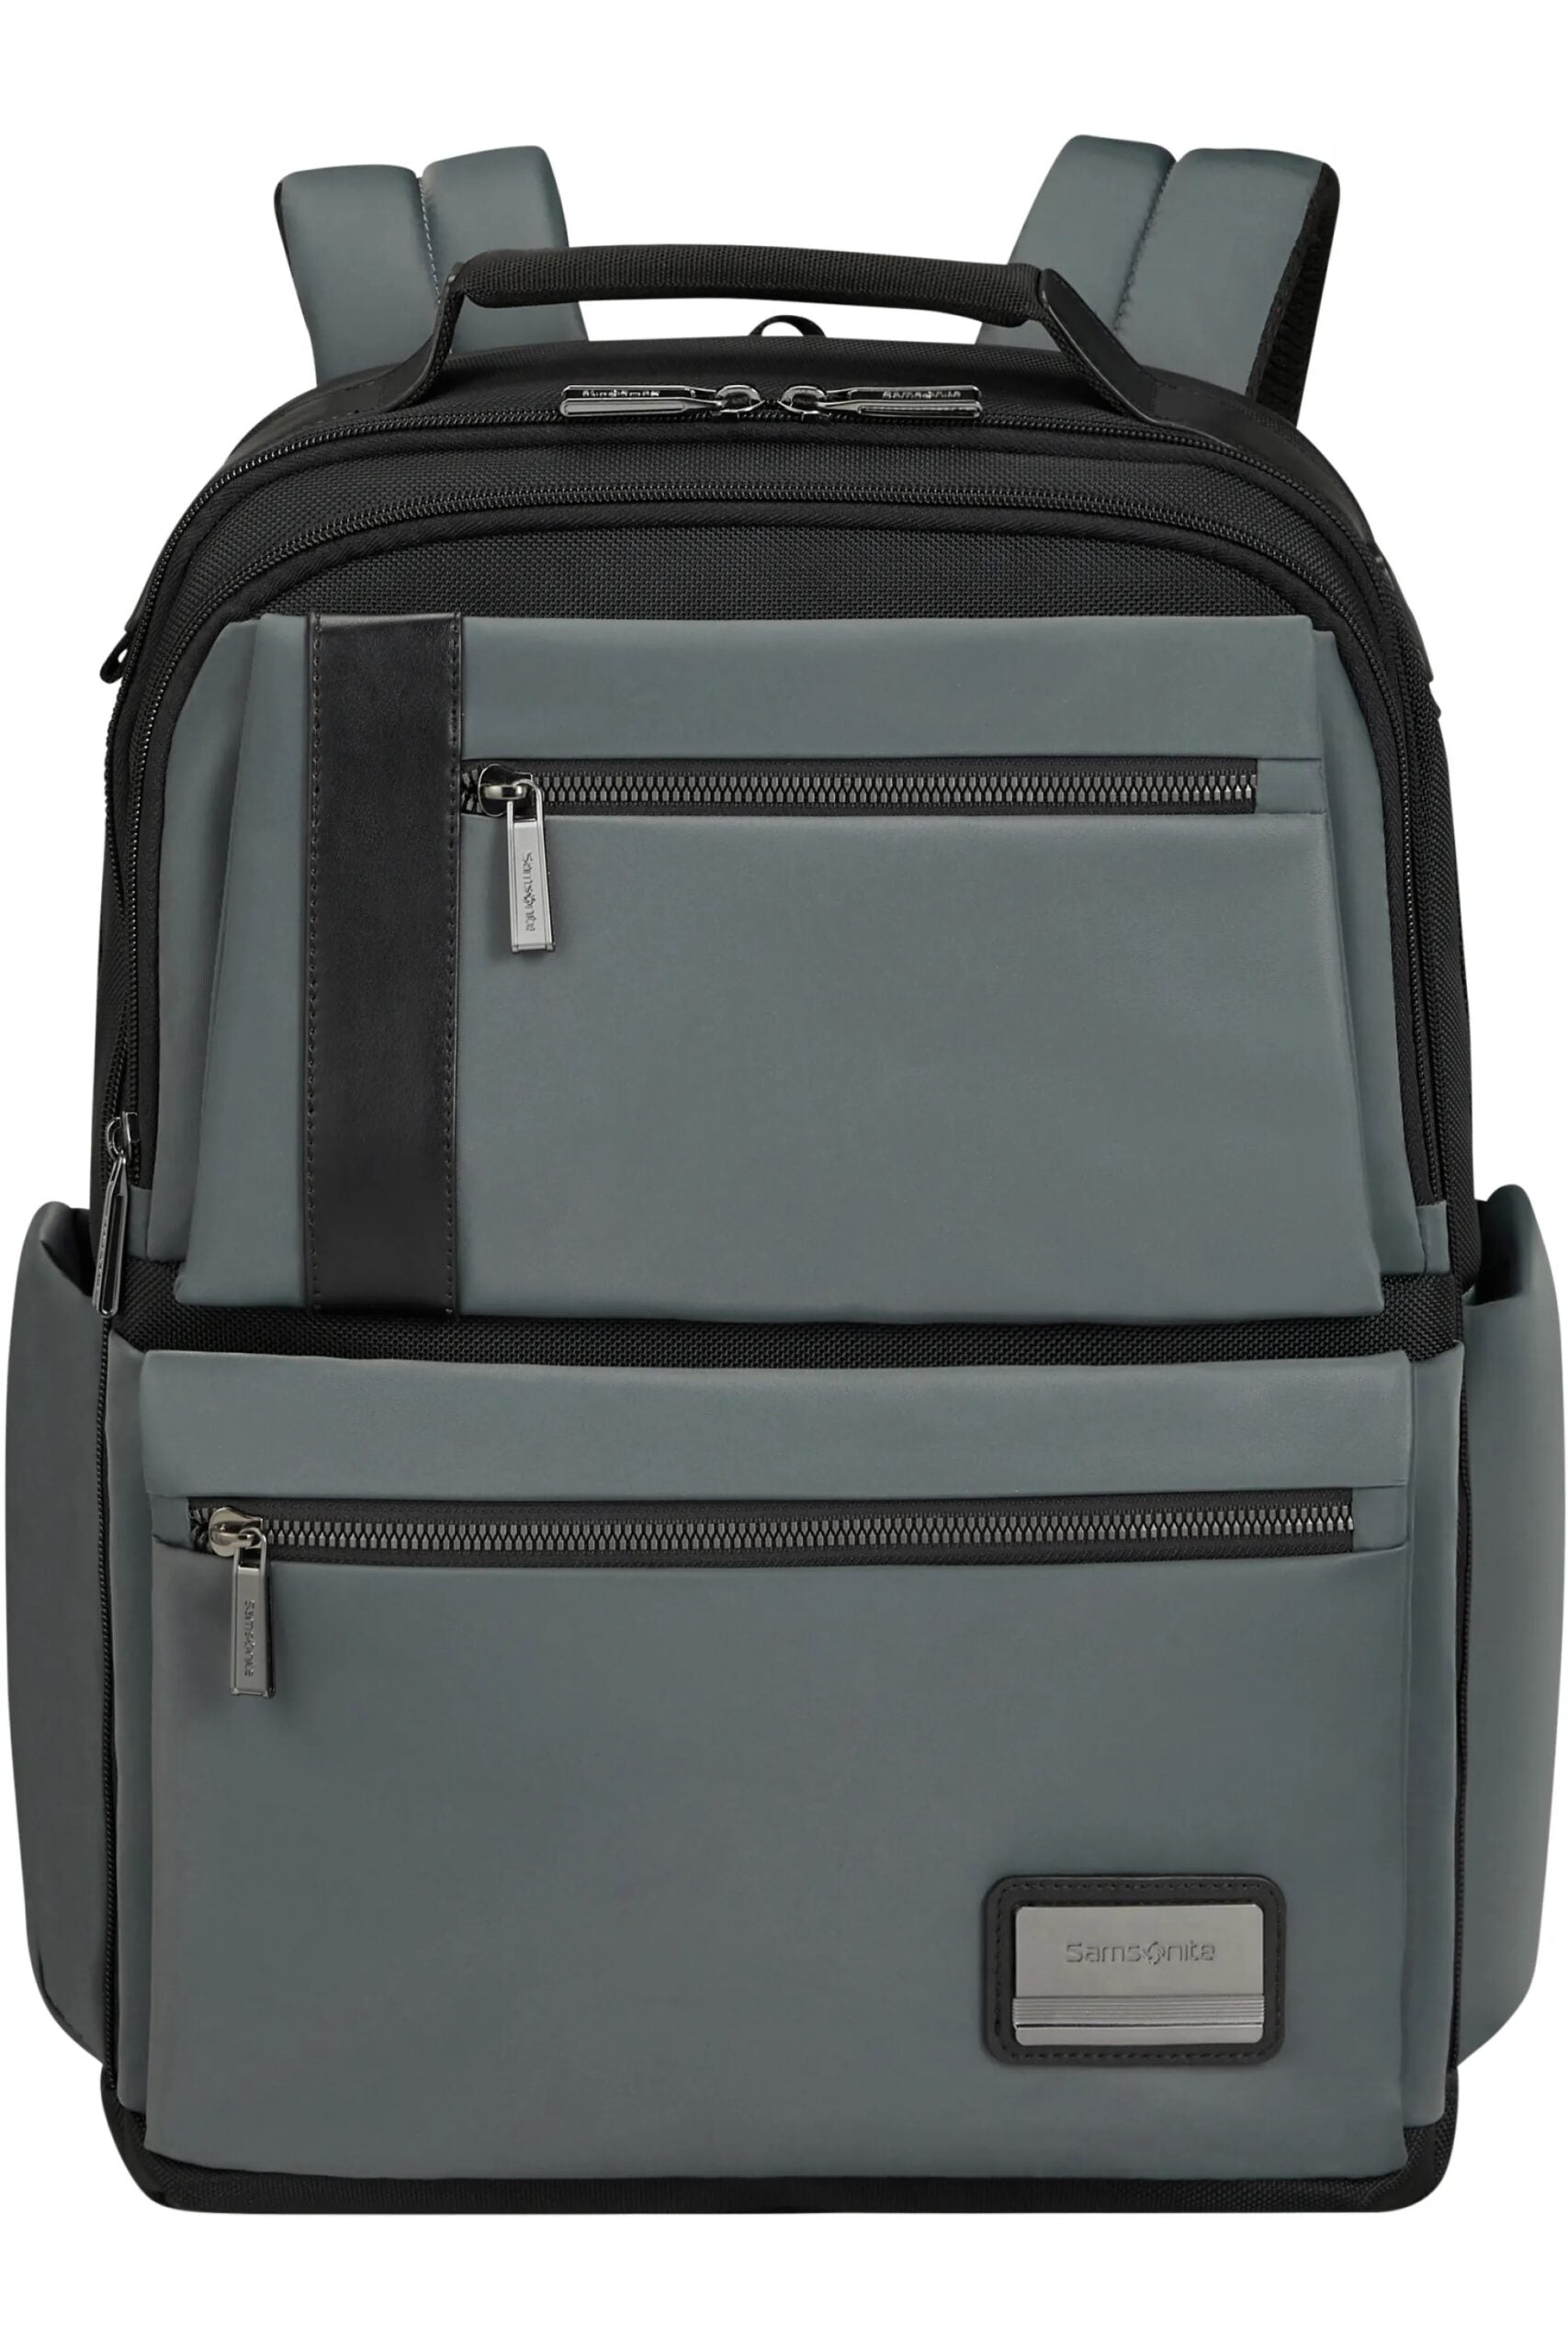 Openroad backpack grey 15.6 1